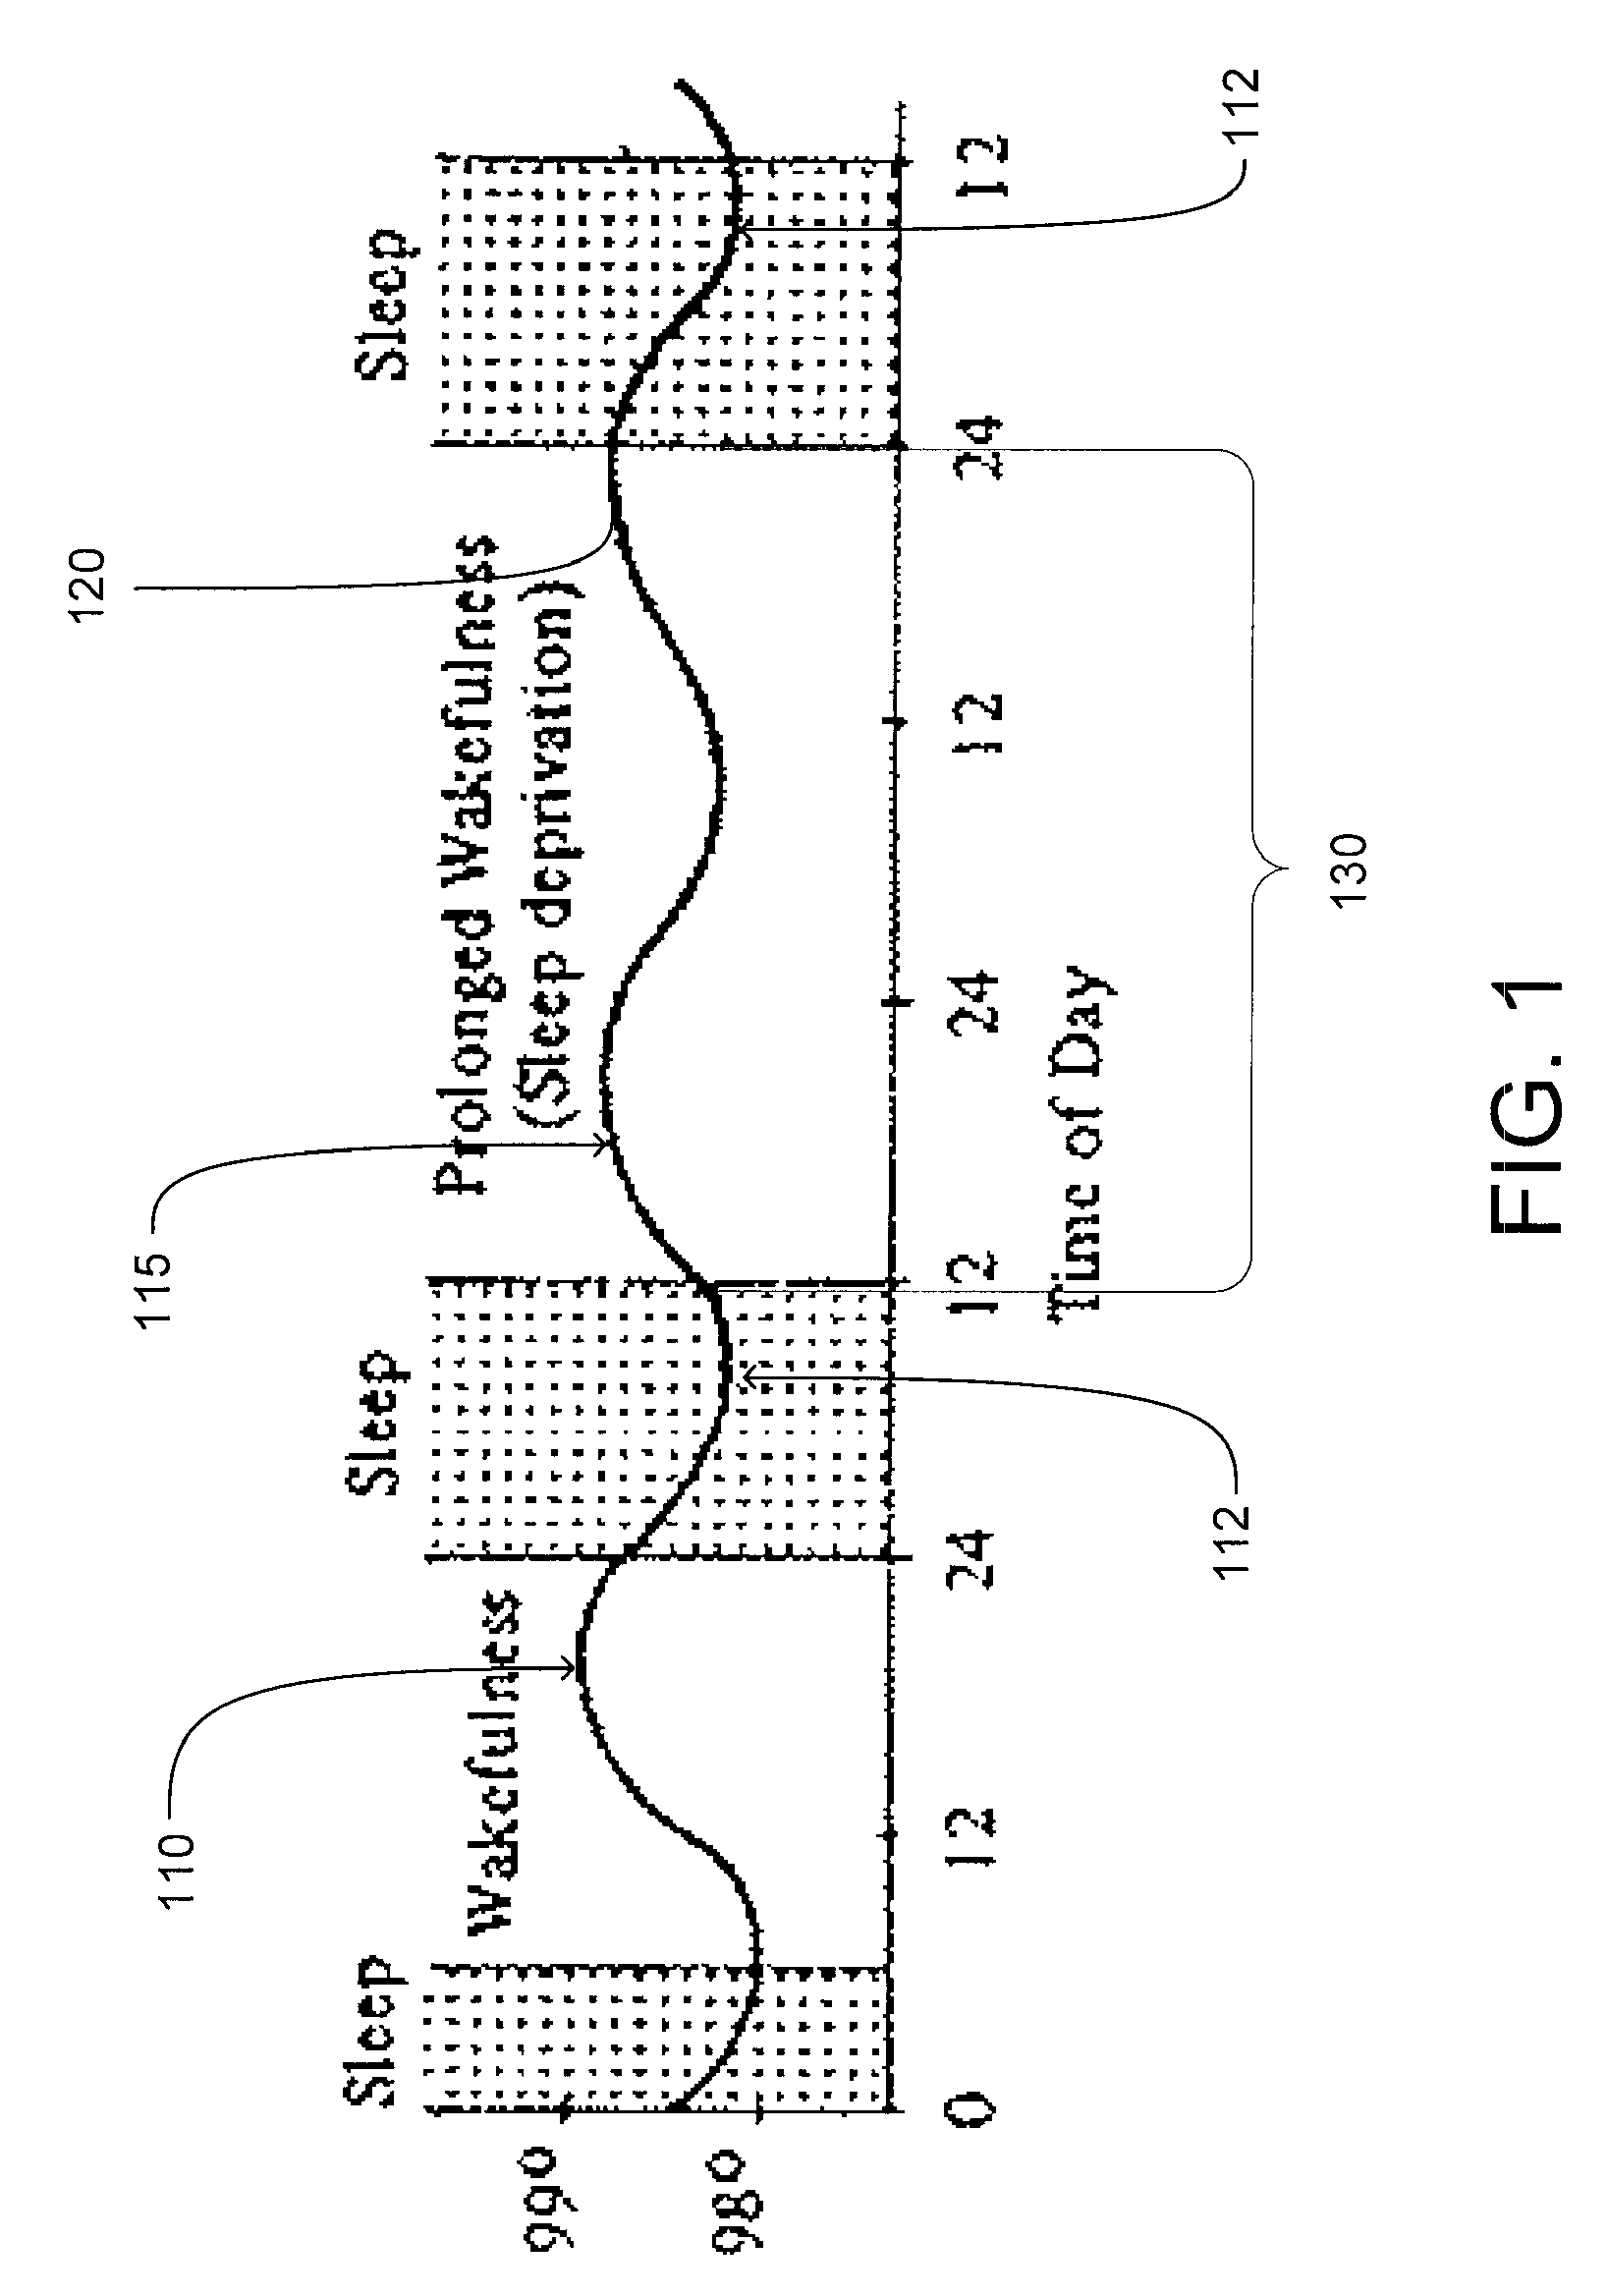 Method and apparatus for manipulating driver core temperature to enhance driver alertness